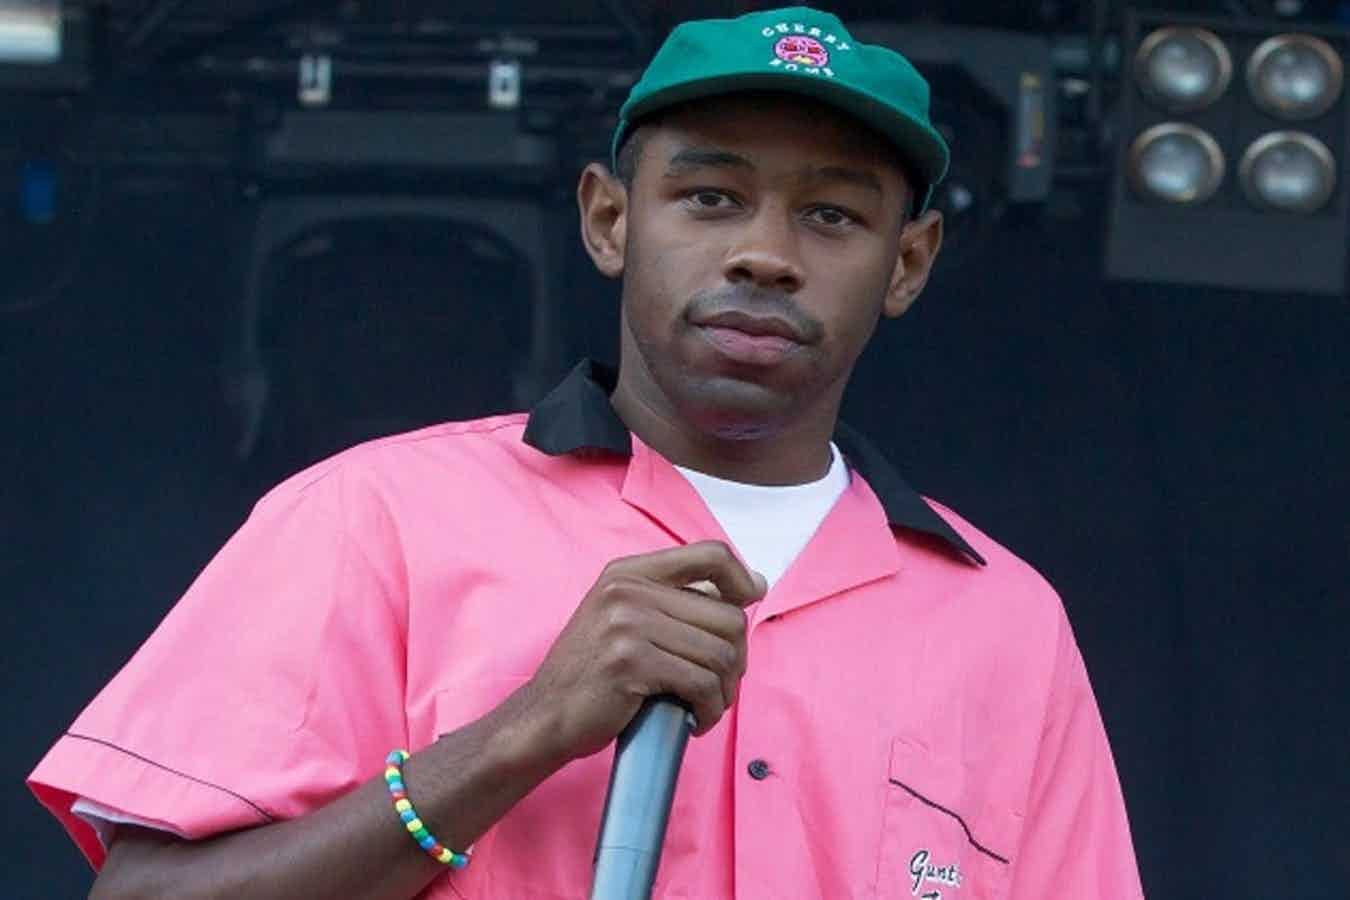 Does tyler the creator do drugs